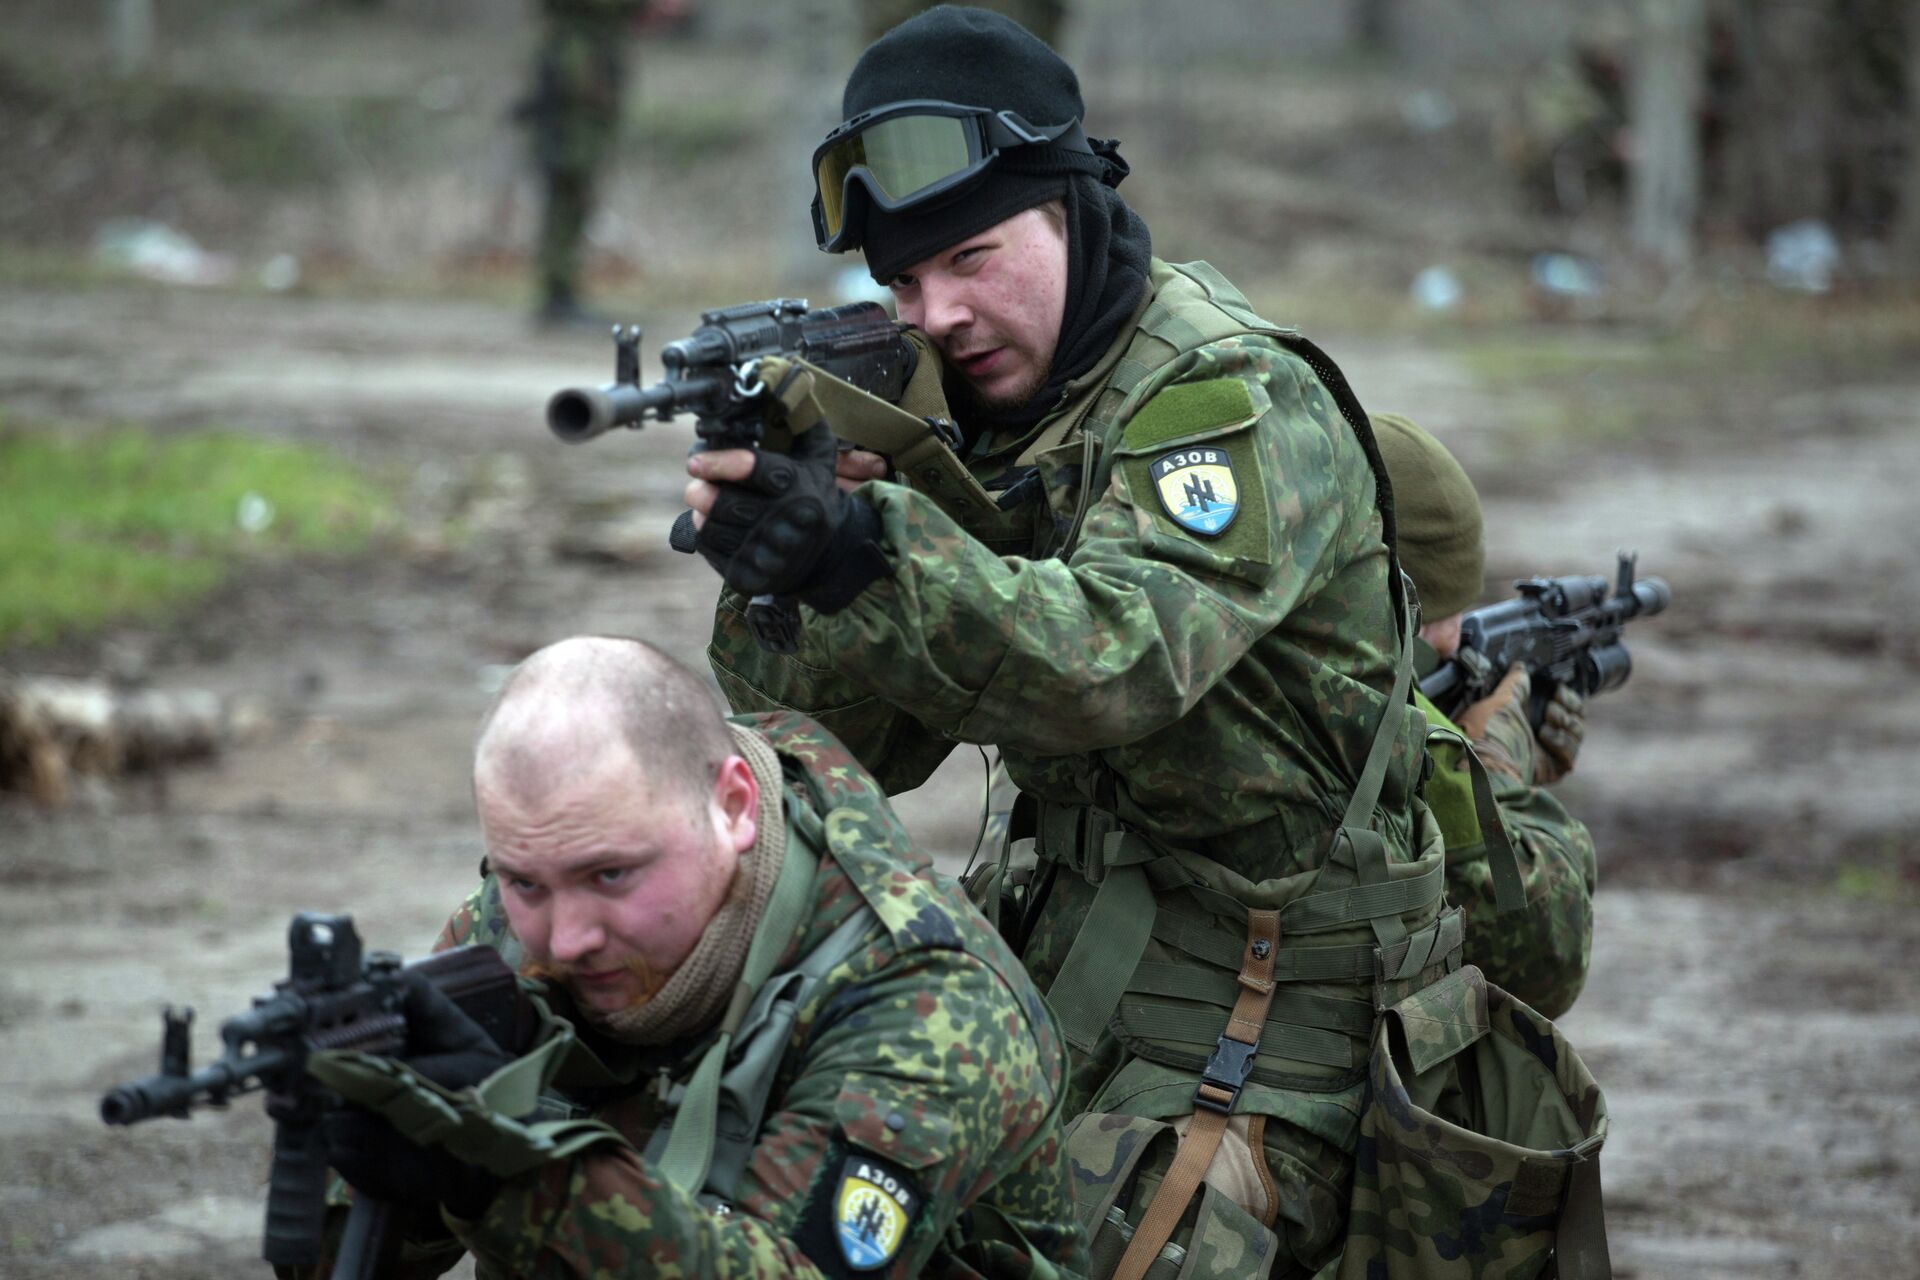 Fighters of the Azov paramilitary battalion, a pro-Ukrainian volunteer armed group, take part in combat drills near the southern Ukrainian city of Mariupol on February 6, 2015 - Sputnik International, 1920, 25.08.2022